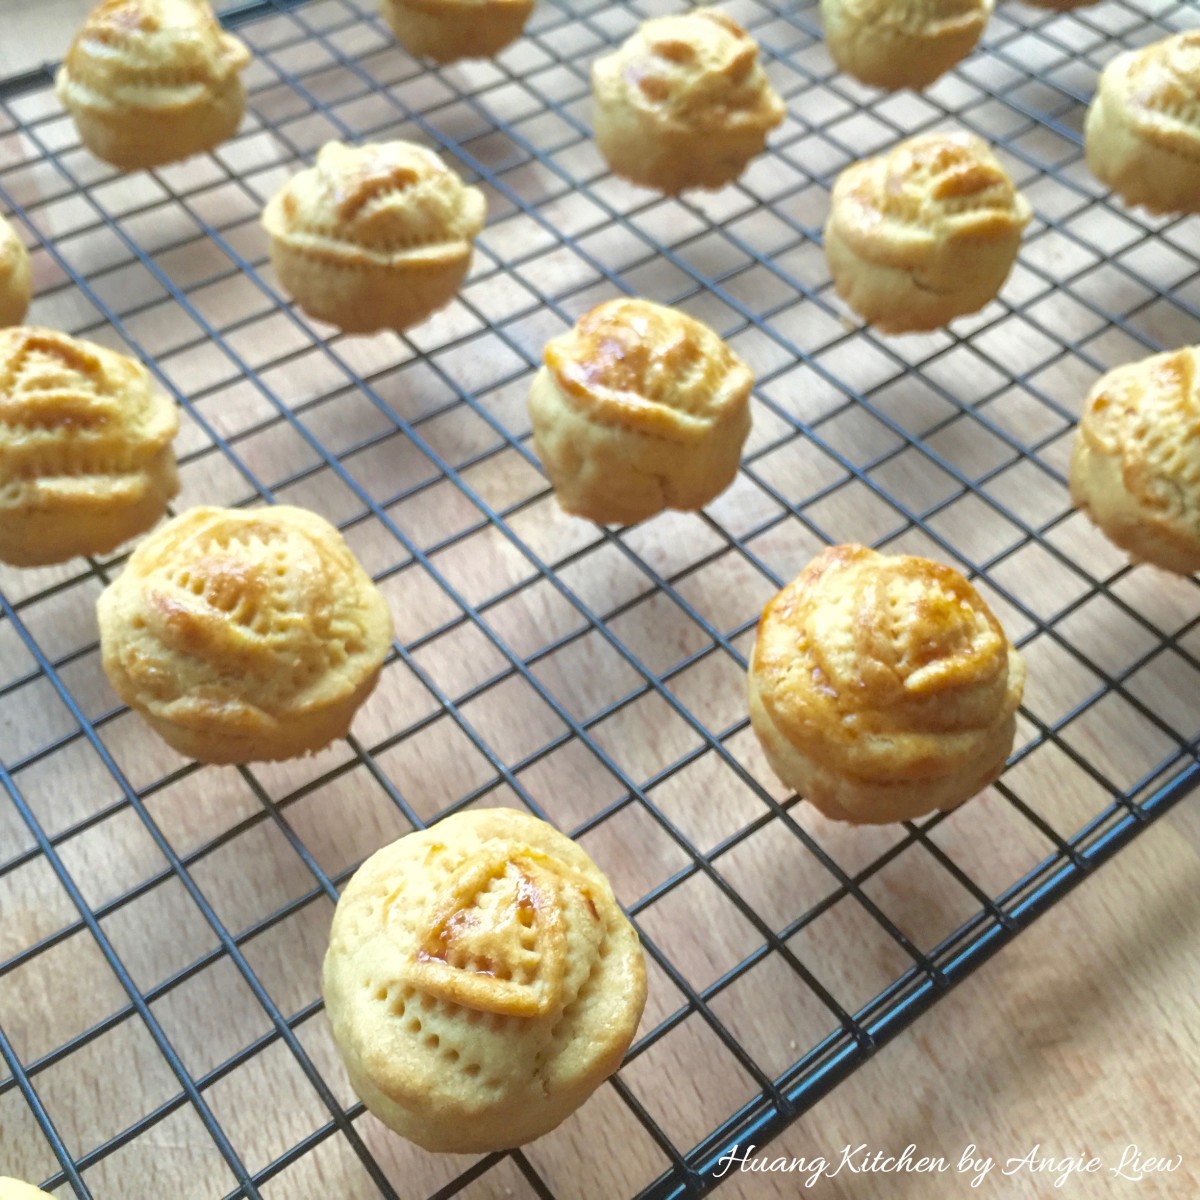 Rose Pineapple Tarts Recipe - cool completely